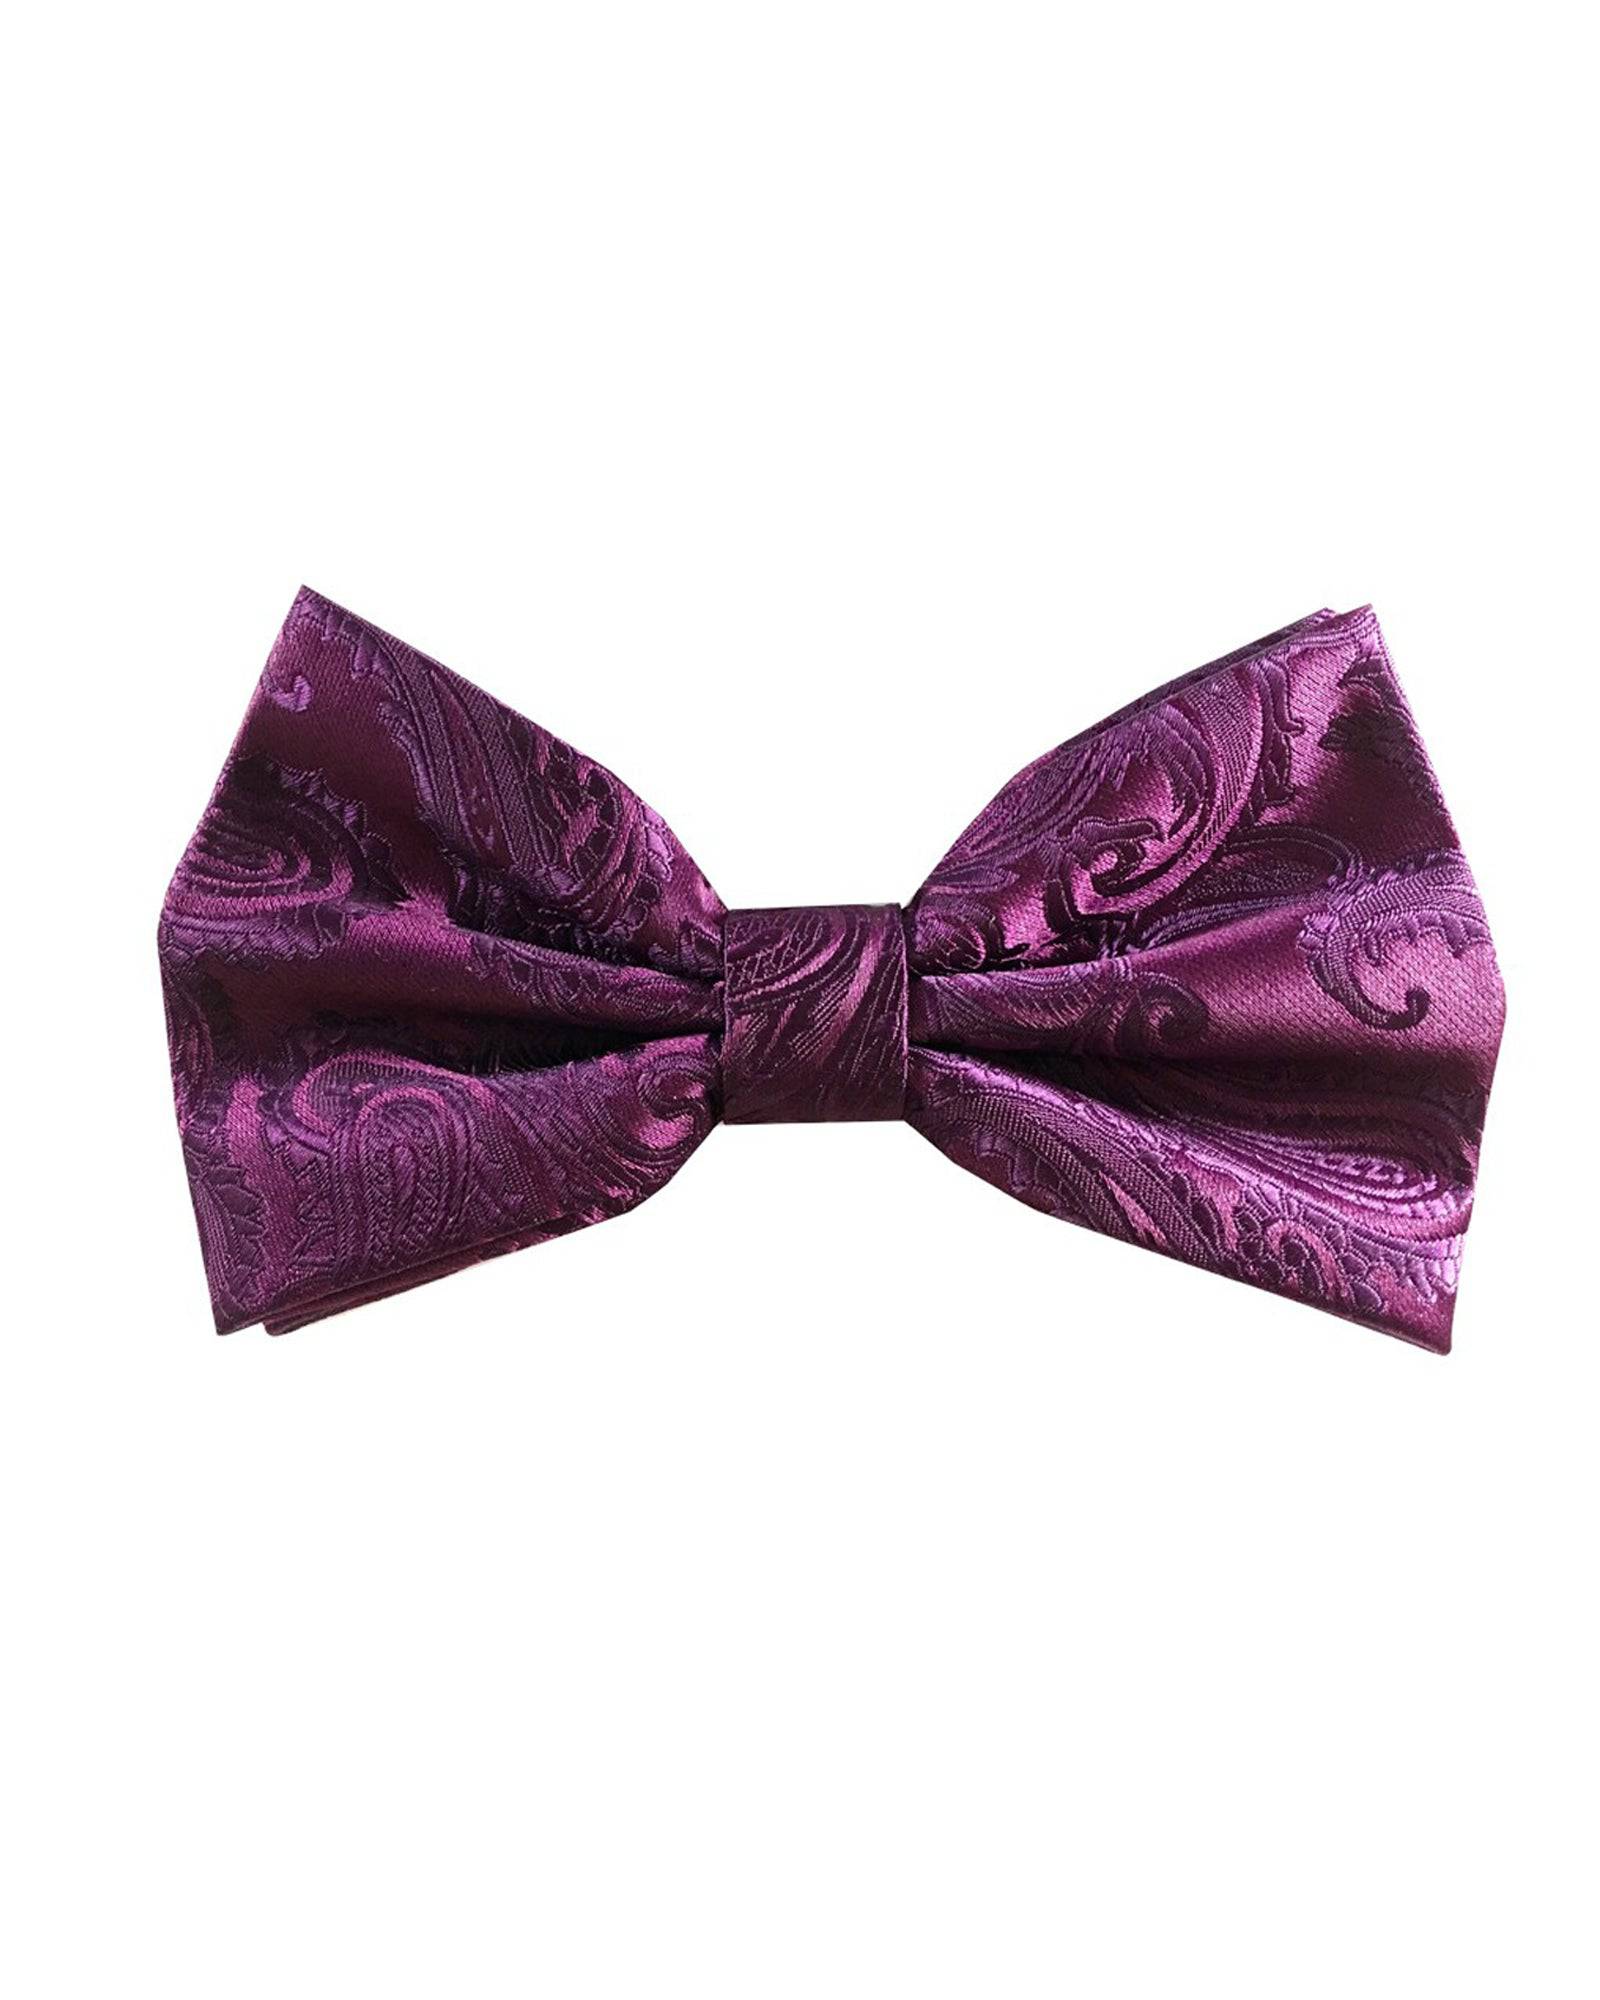 Bow Tie In Paisley Pattern Eggplant - Rainwater's Men's Clothing and Tuxedo Rental